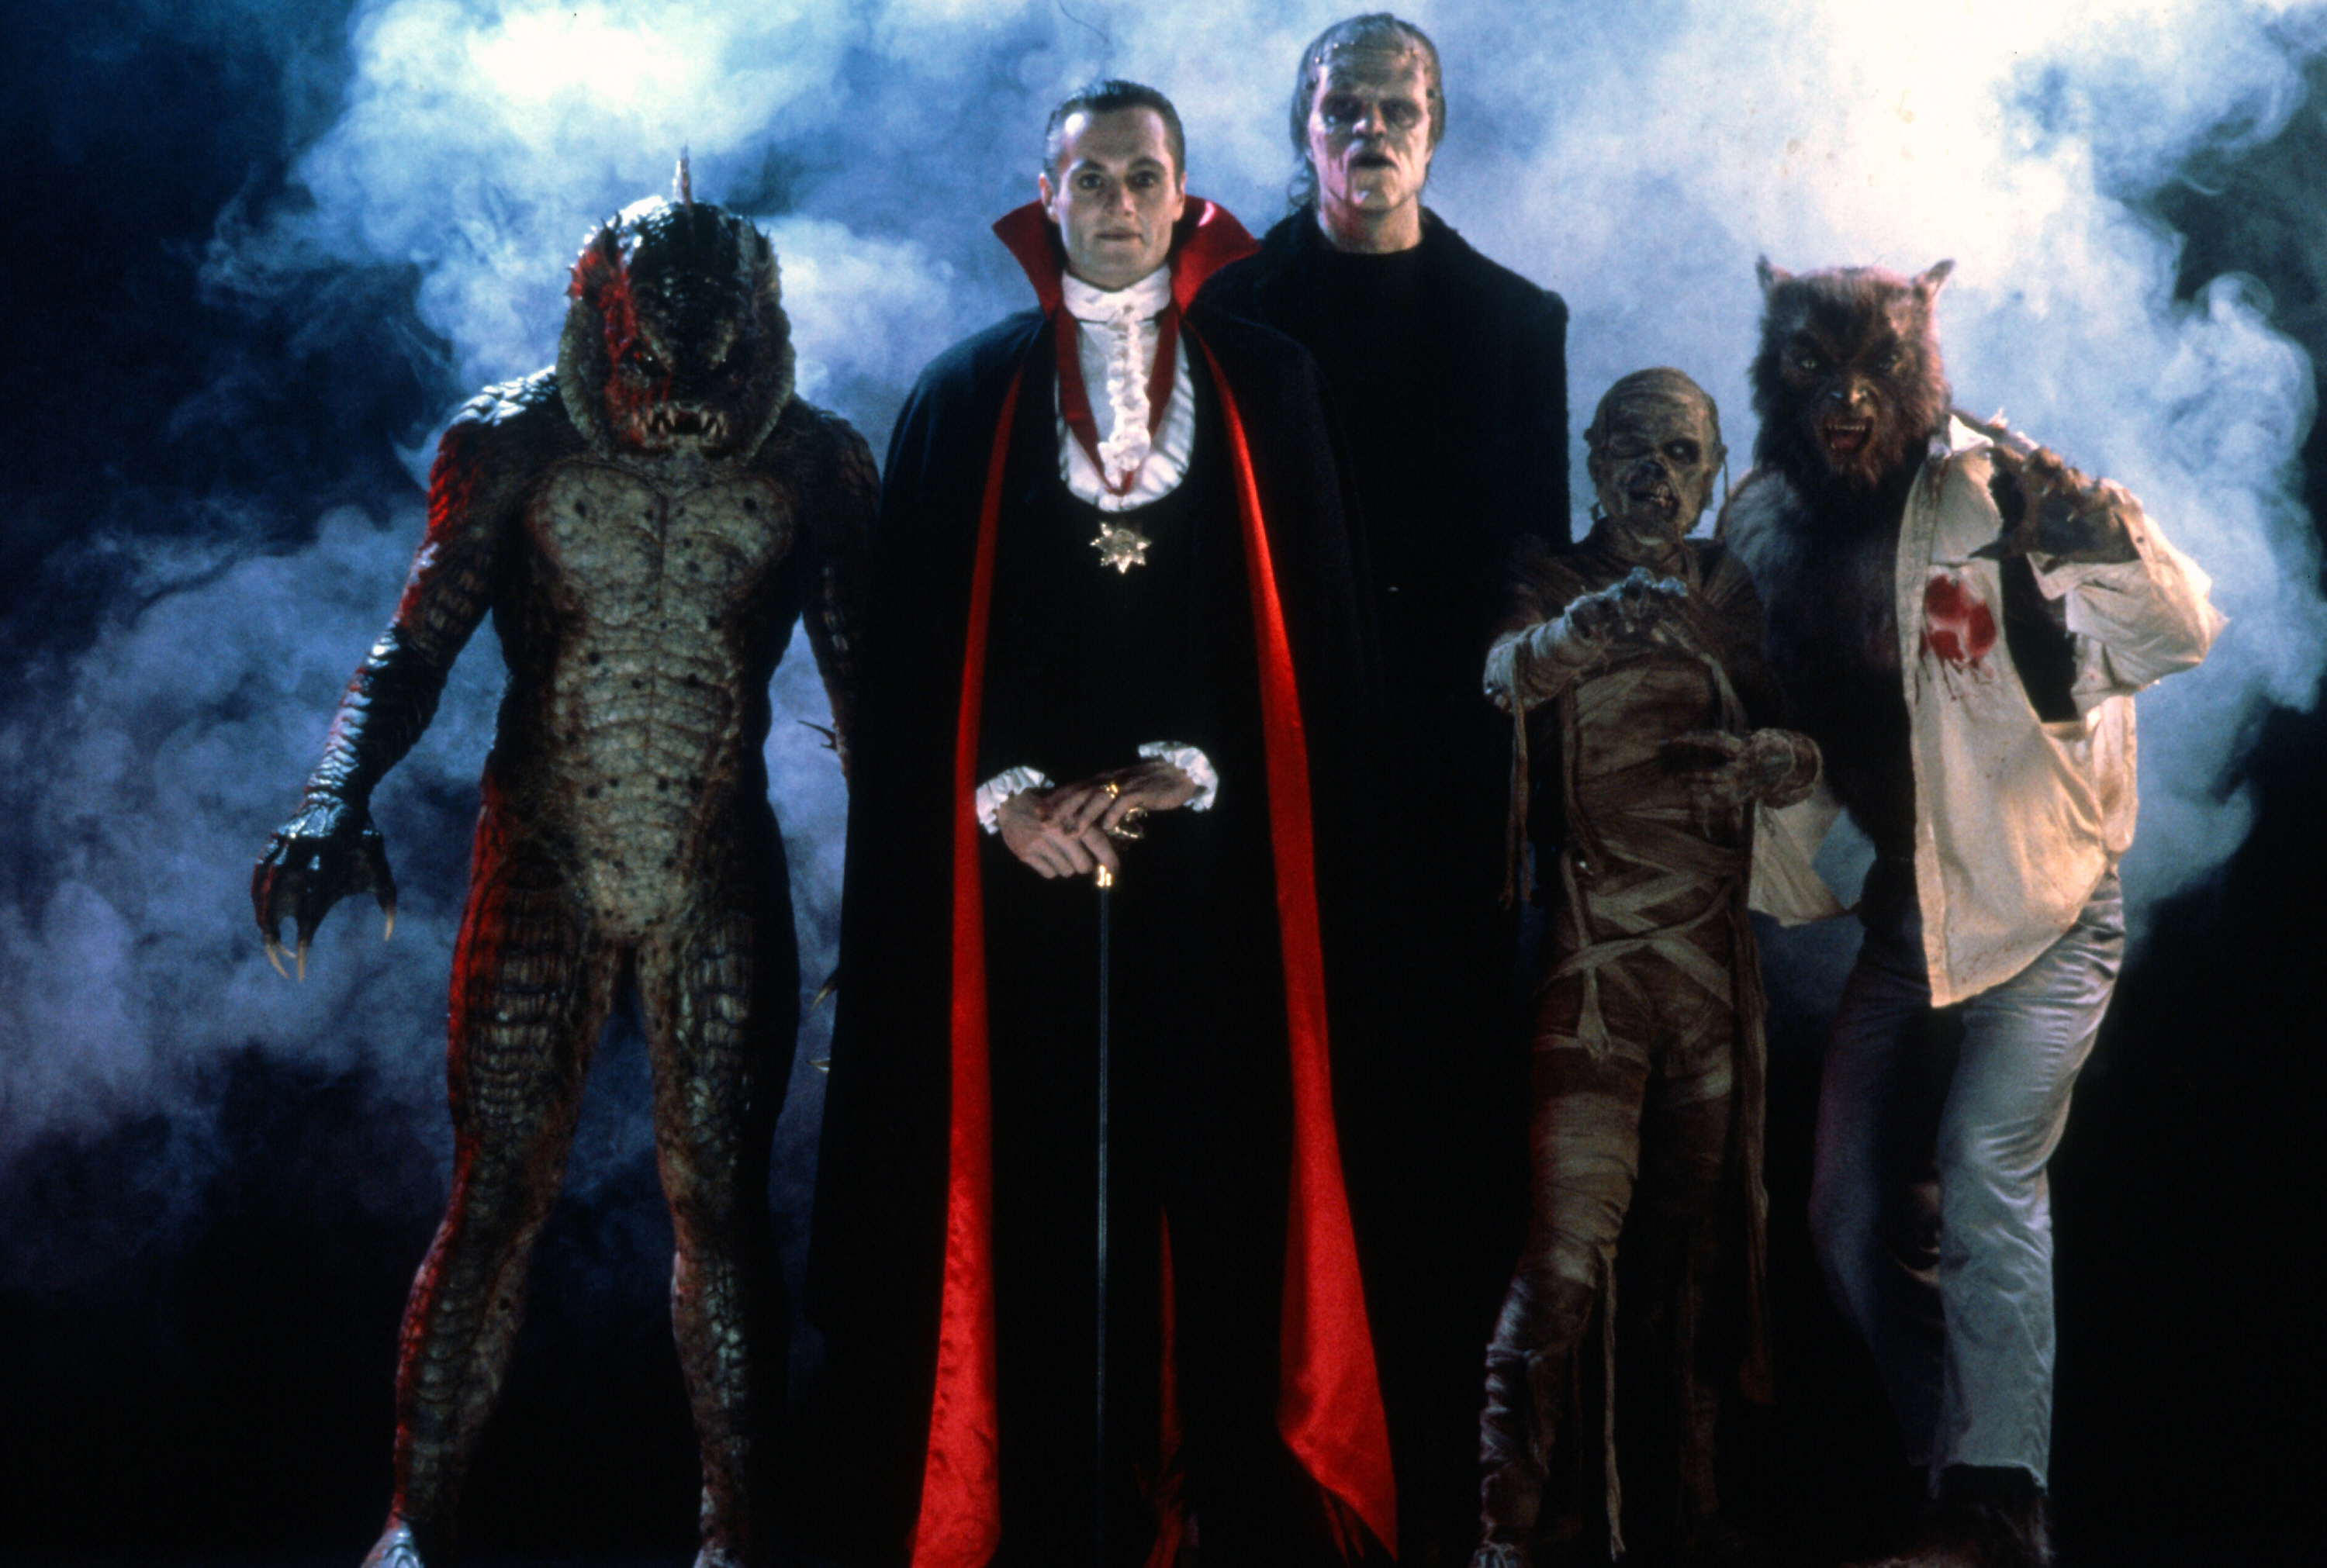 The Creature from the Black Lagoon, Dracula, The Wolfman, Frankenstein's Monster and The Mummy in The Monster Squad.